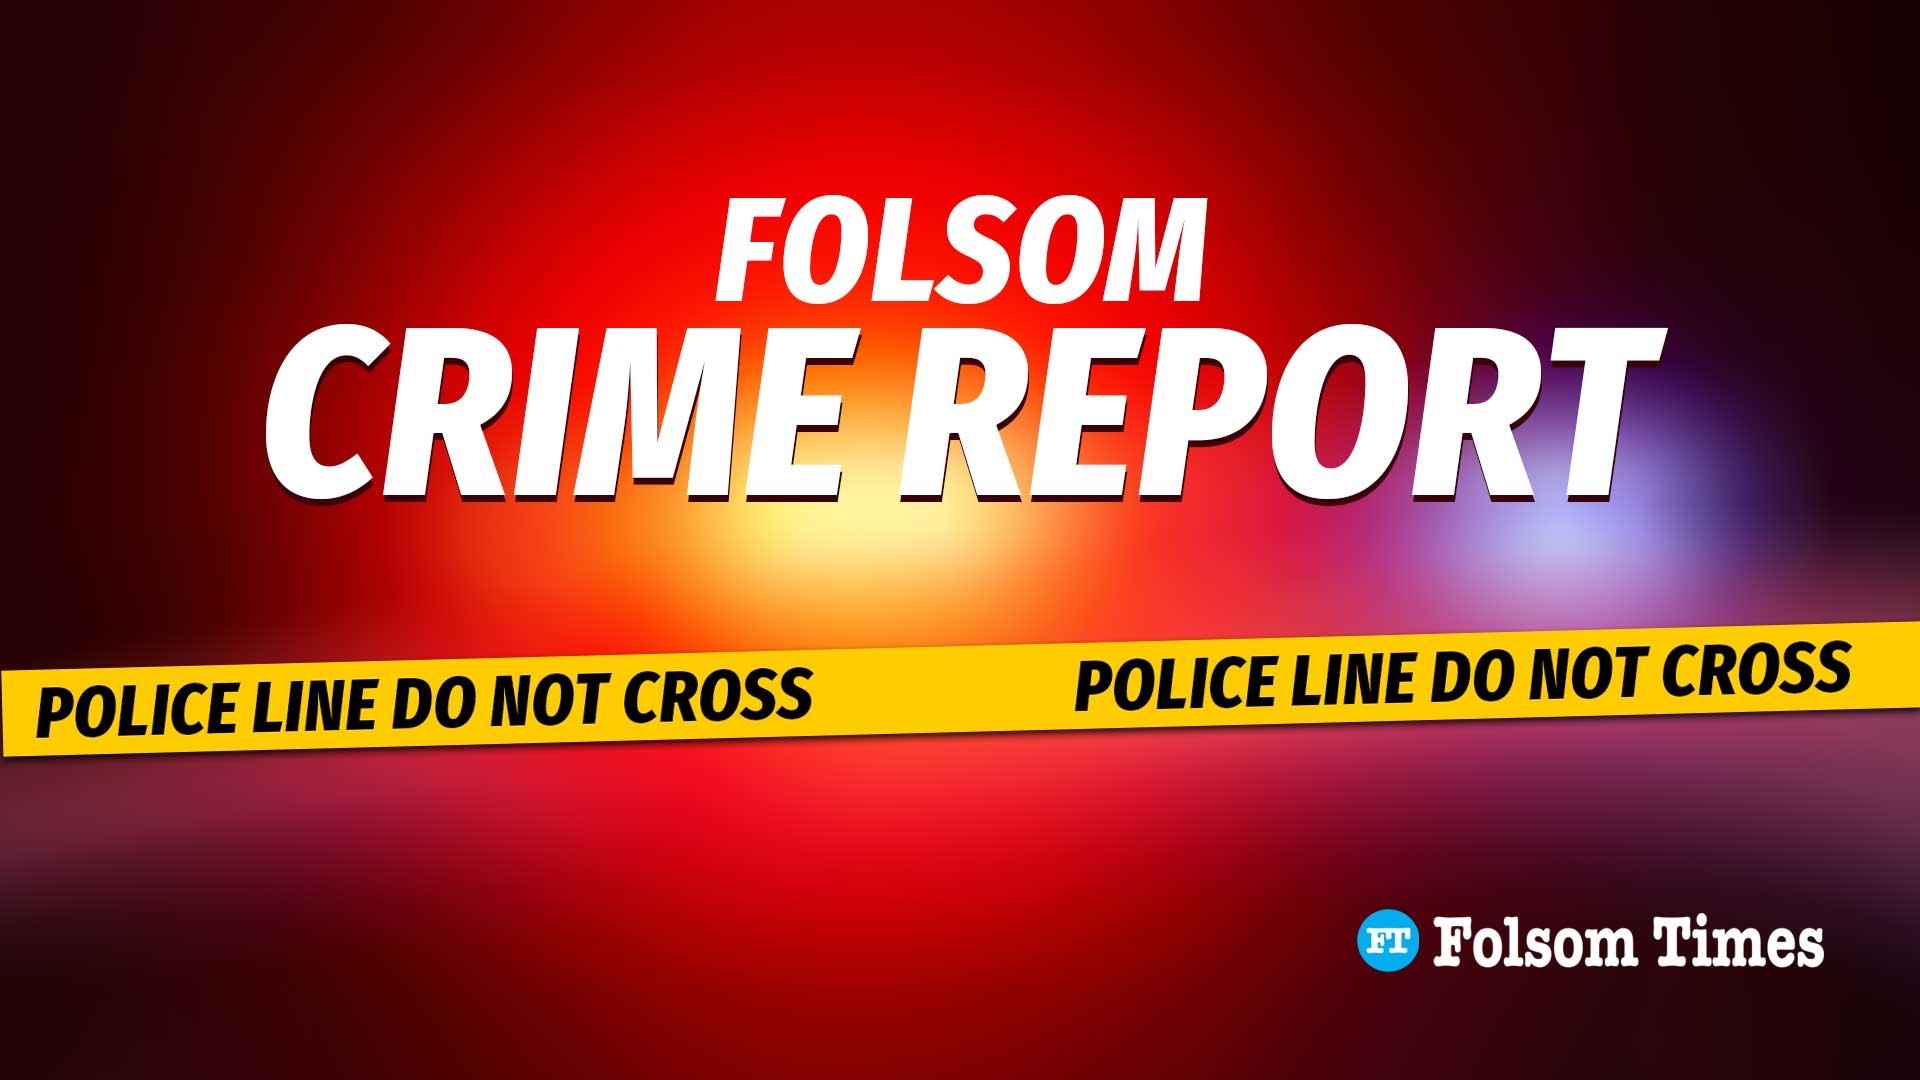 Kidnapping, assault and more in latest Folsom crime reports